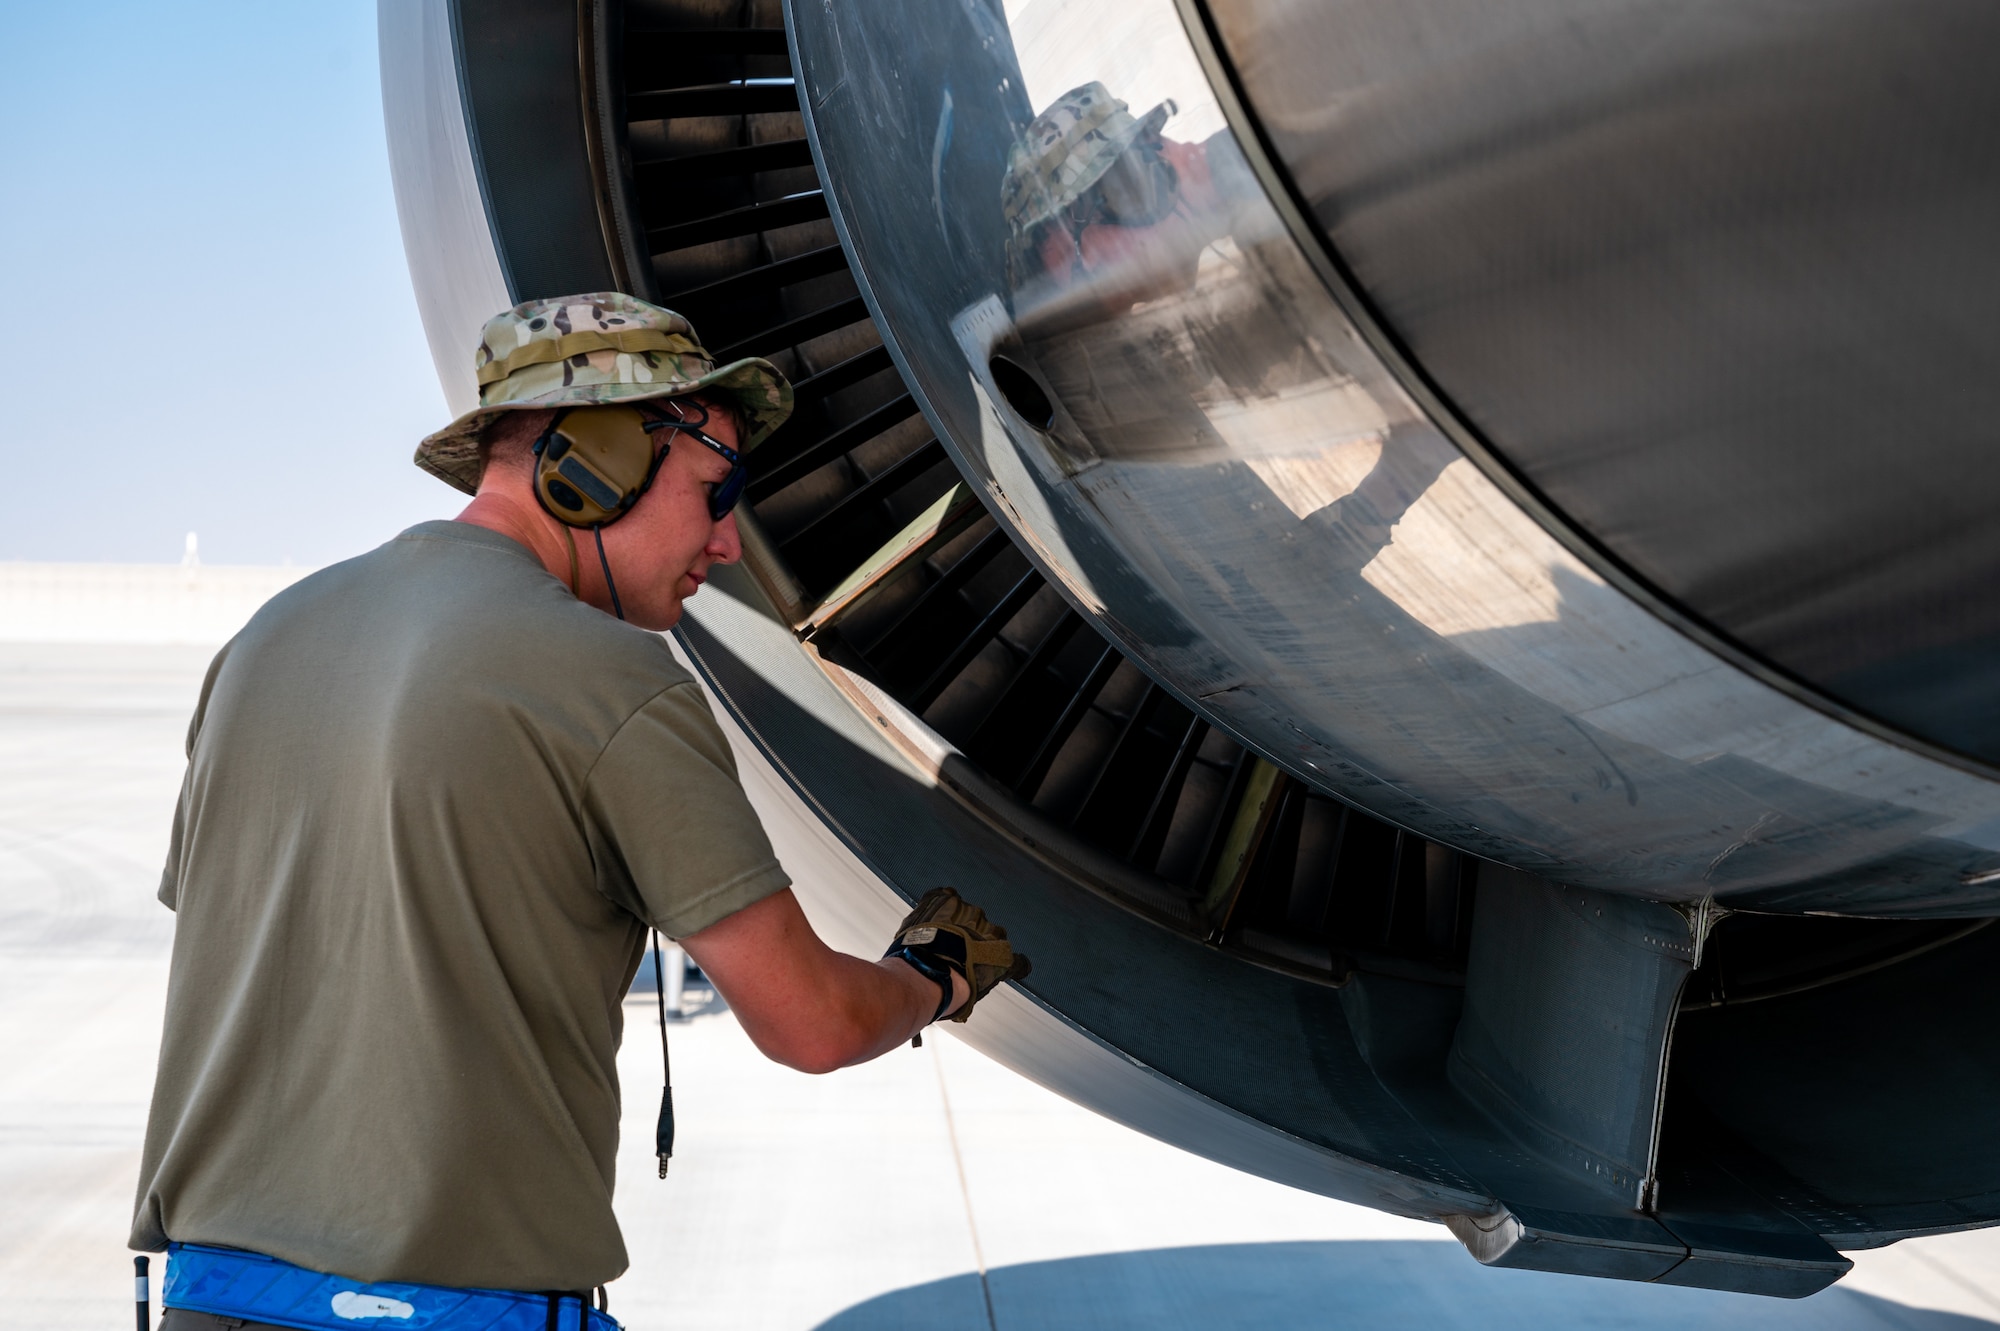 U.S. Air Force Staff Sgt. Austin Sabolic, 22nd Maintenance Squadron crew chief, inspects a KC-46A Pegasus engine Aug. 30, 2022, at Al Udeid Air Base, Qatar. After an aircraft lands, maintenance personnel perform inspections on various parts of the aircraft to ensure there is no damage from the flight. Airmen and KC-46 Pegasuses from McConnell Air Force Base, Kansas, are conducting Air Mobility Command’s Employment Concept Exercise 22-08 to evaluate the aircraft under stressed conditions. (U.S. Air Force photo by Airman 1st Class Brenden Beezley)